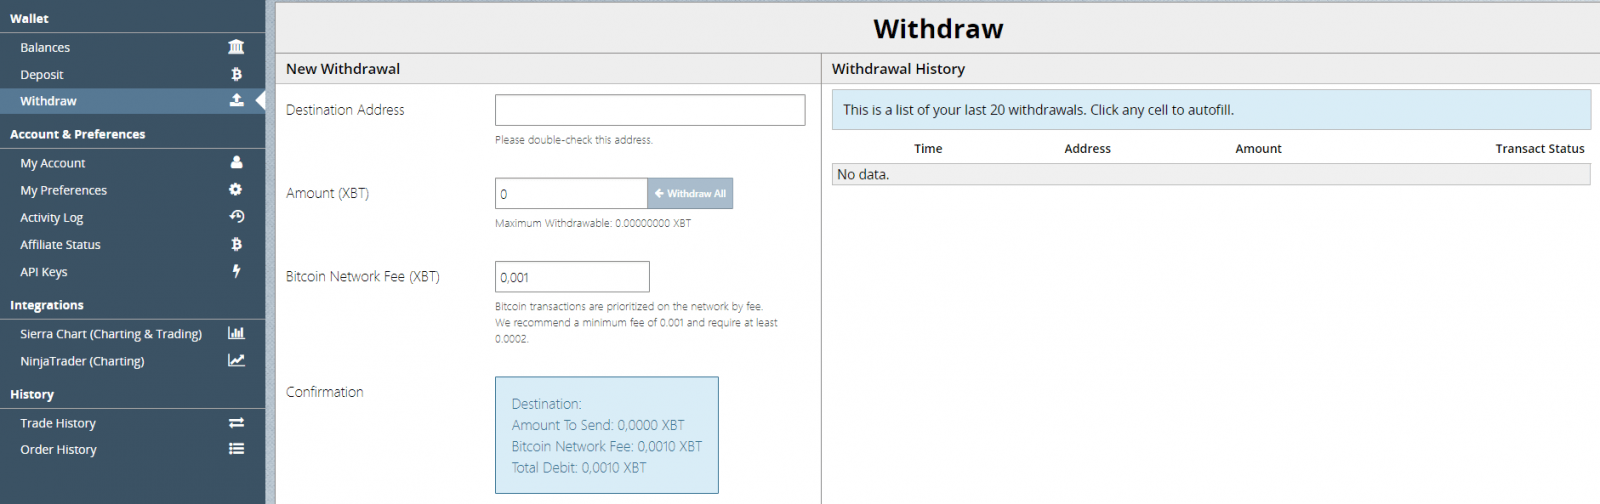 How to withdraw money from the BitMEX exchange